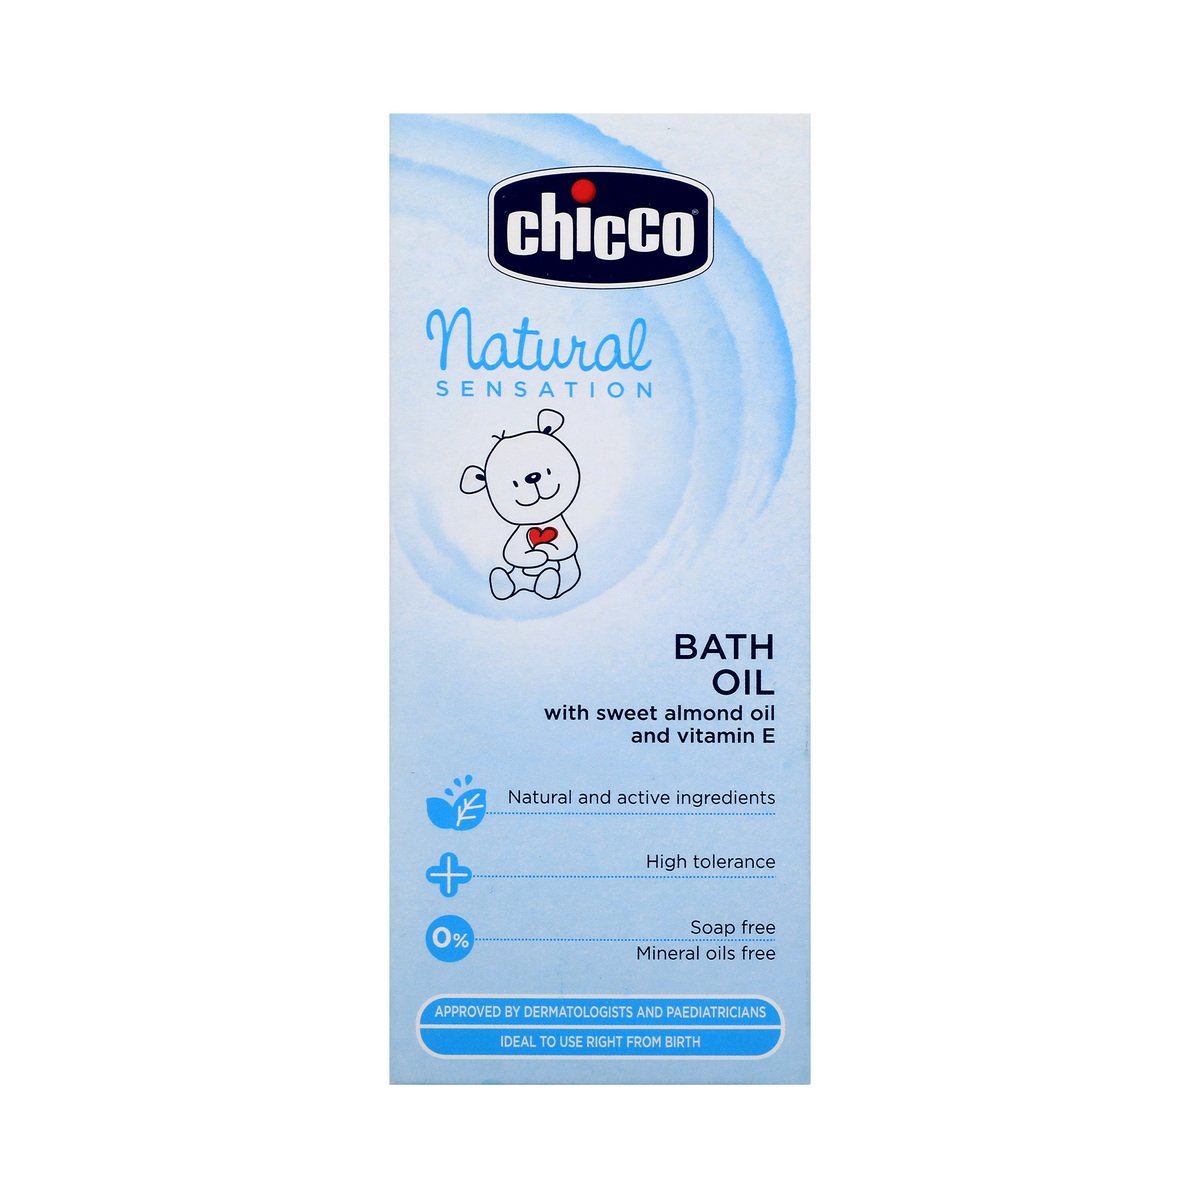 Chicco Natural Sensation Bath Oil with Sweet Almond Oil and Vitamin E, 200 ml